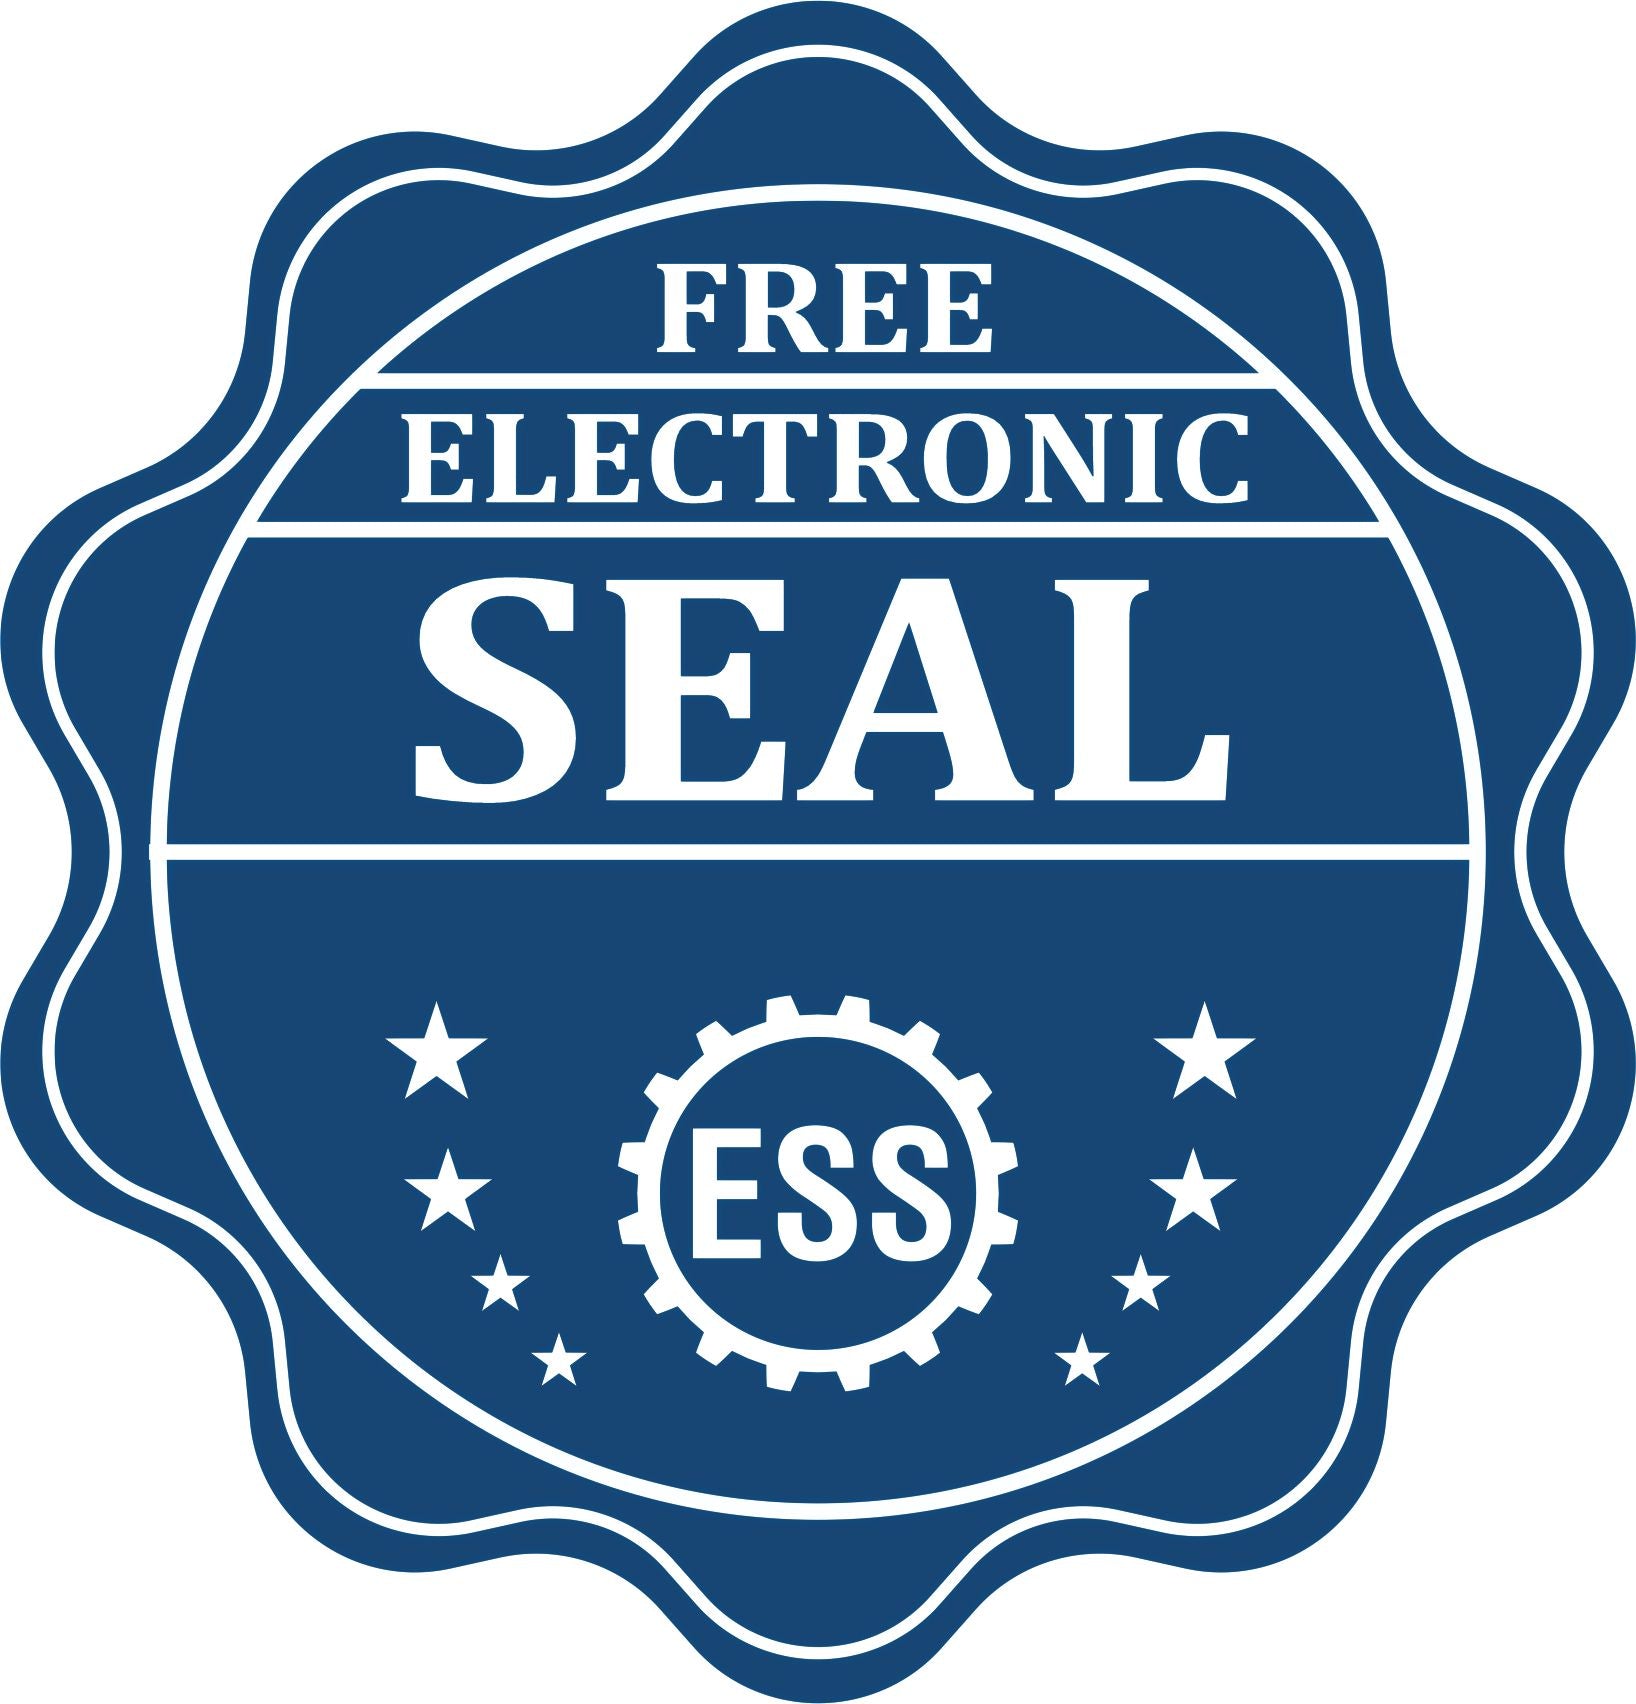 A badge showing a free electronic seal for the Handheld Puerto Rico Professional Engineer Embosser with stars and the ESS gear on the emblem.